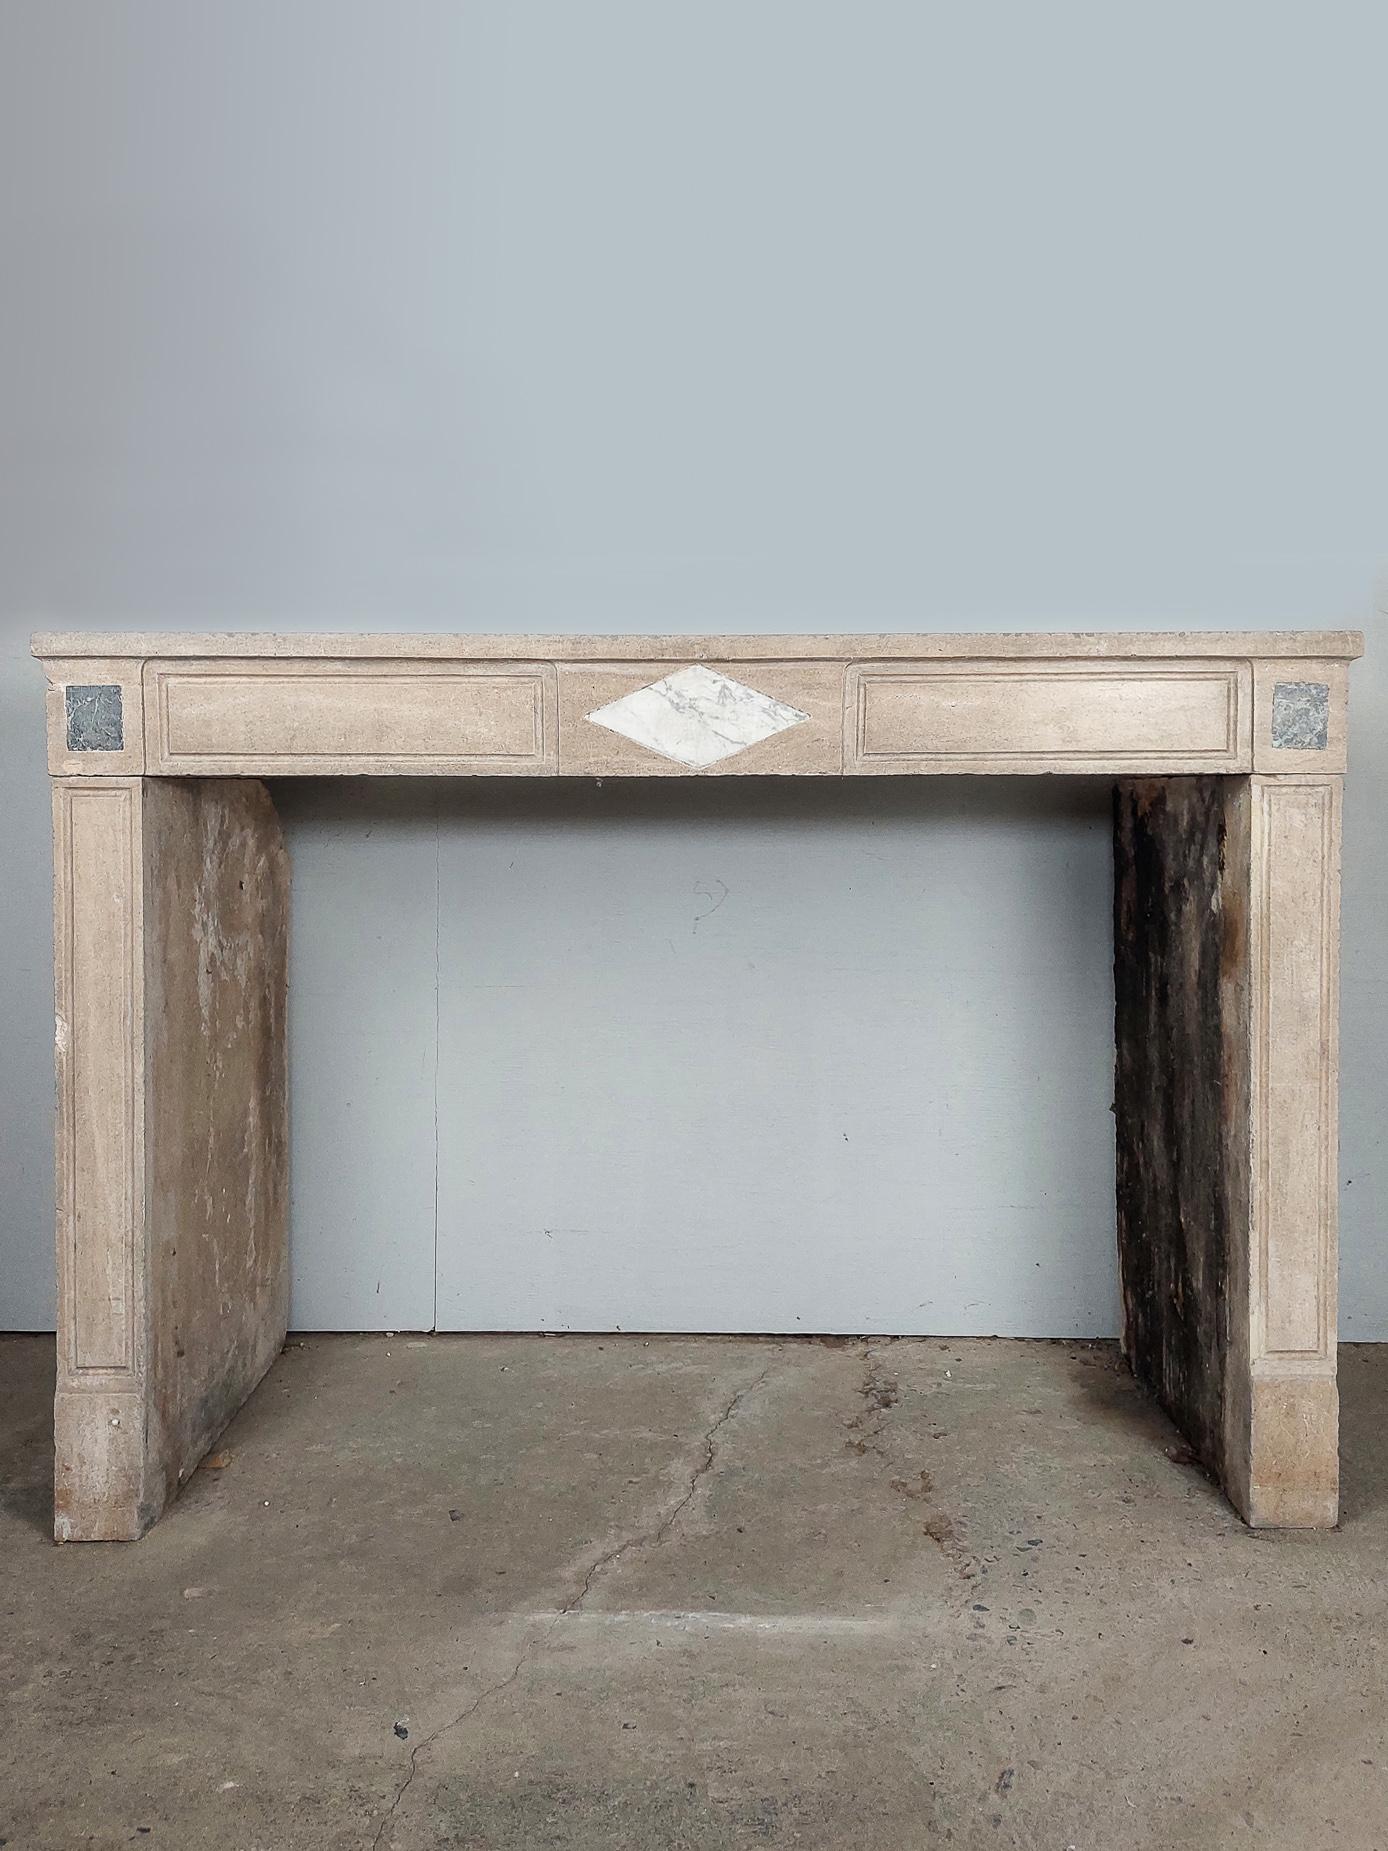 Antique French natural stone fireplace. 19th century mantelpiece made of burgundian stone (Pierre de bourgogne) in beige / sand tones. This fireplace is decorated with a diamond shape of inlaid Bianco carrara and square inlays of St. Anna marble at